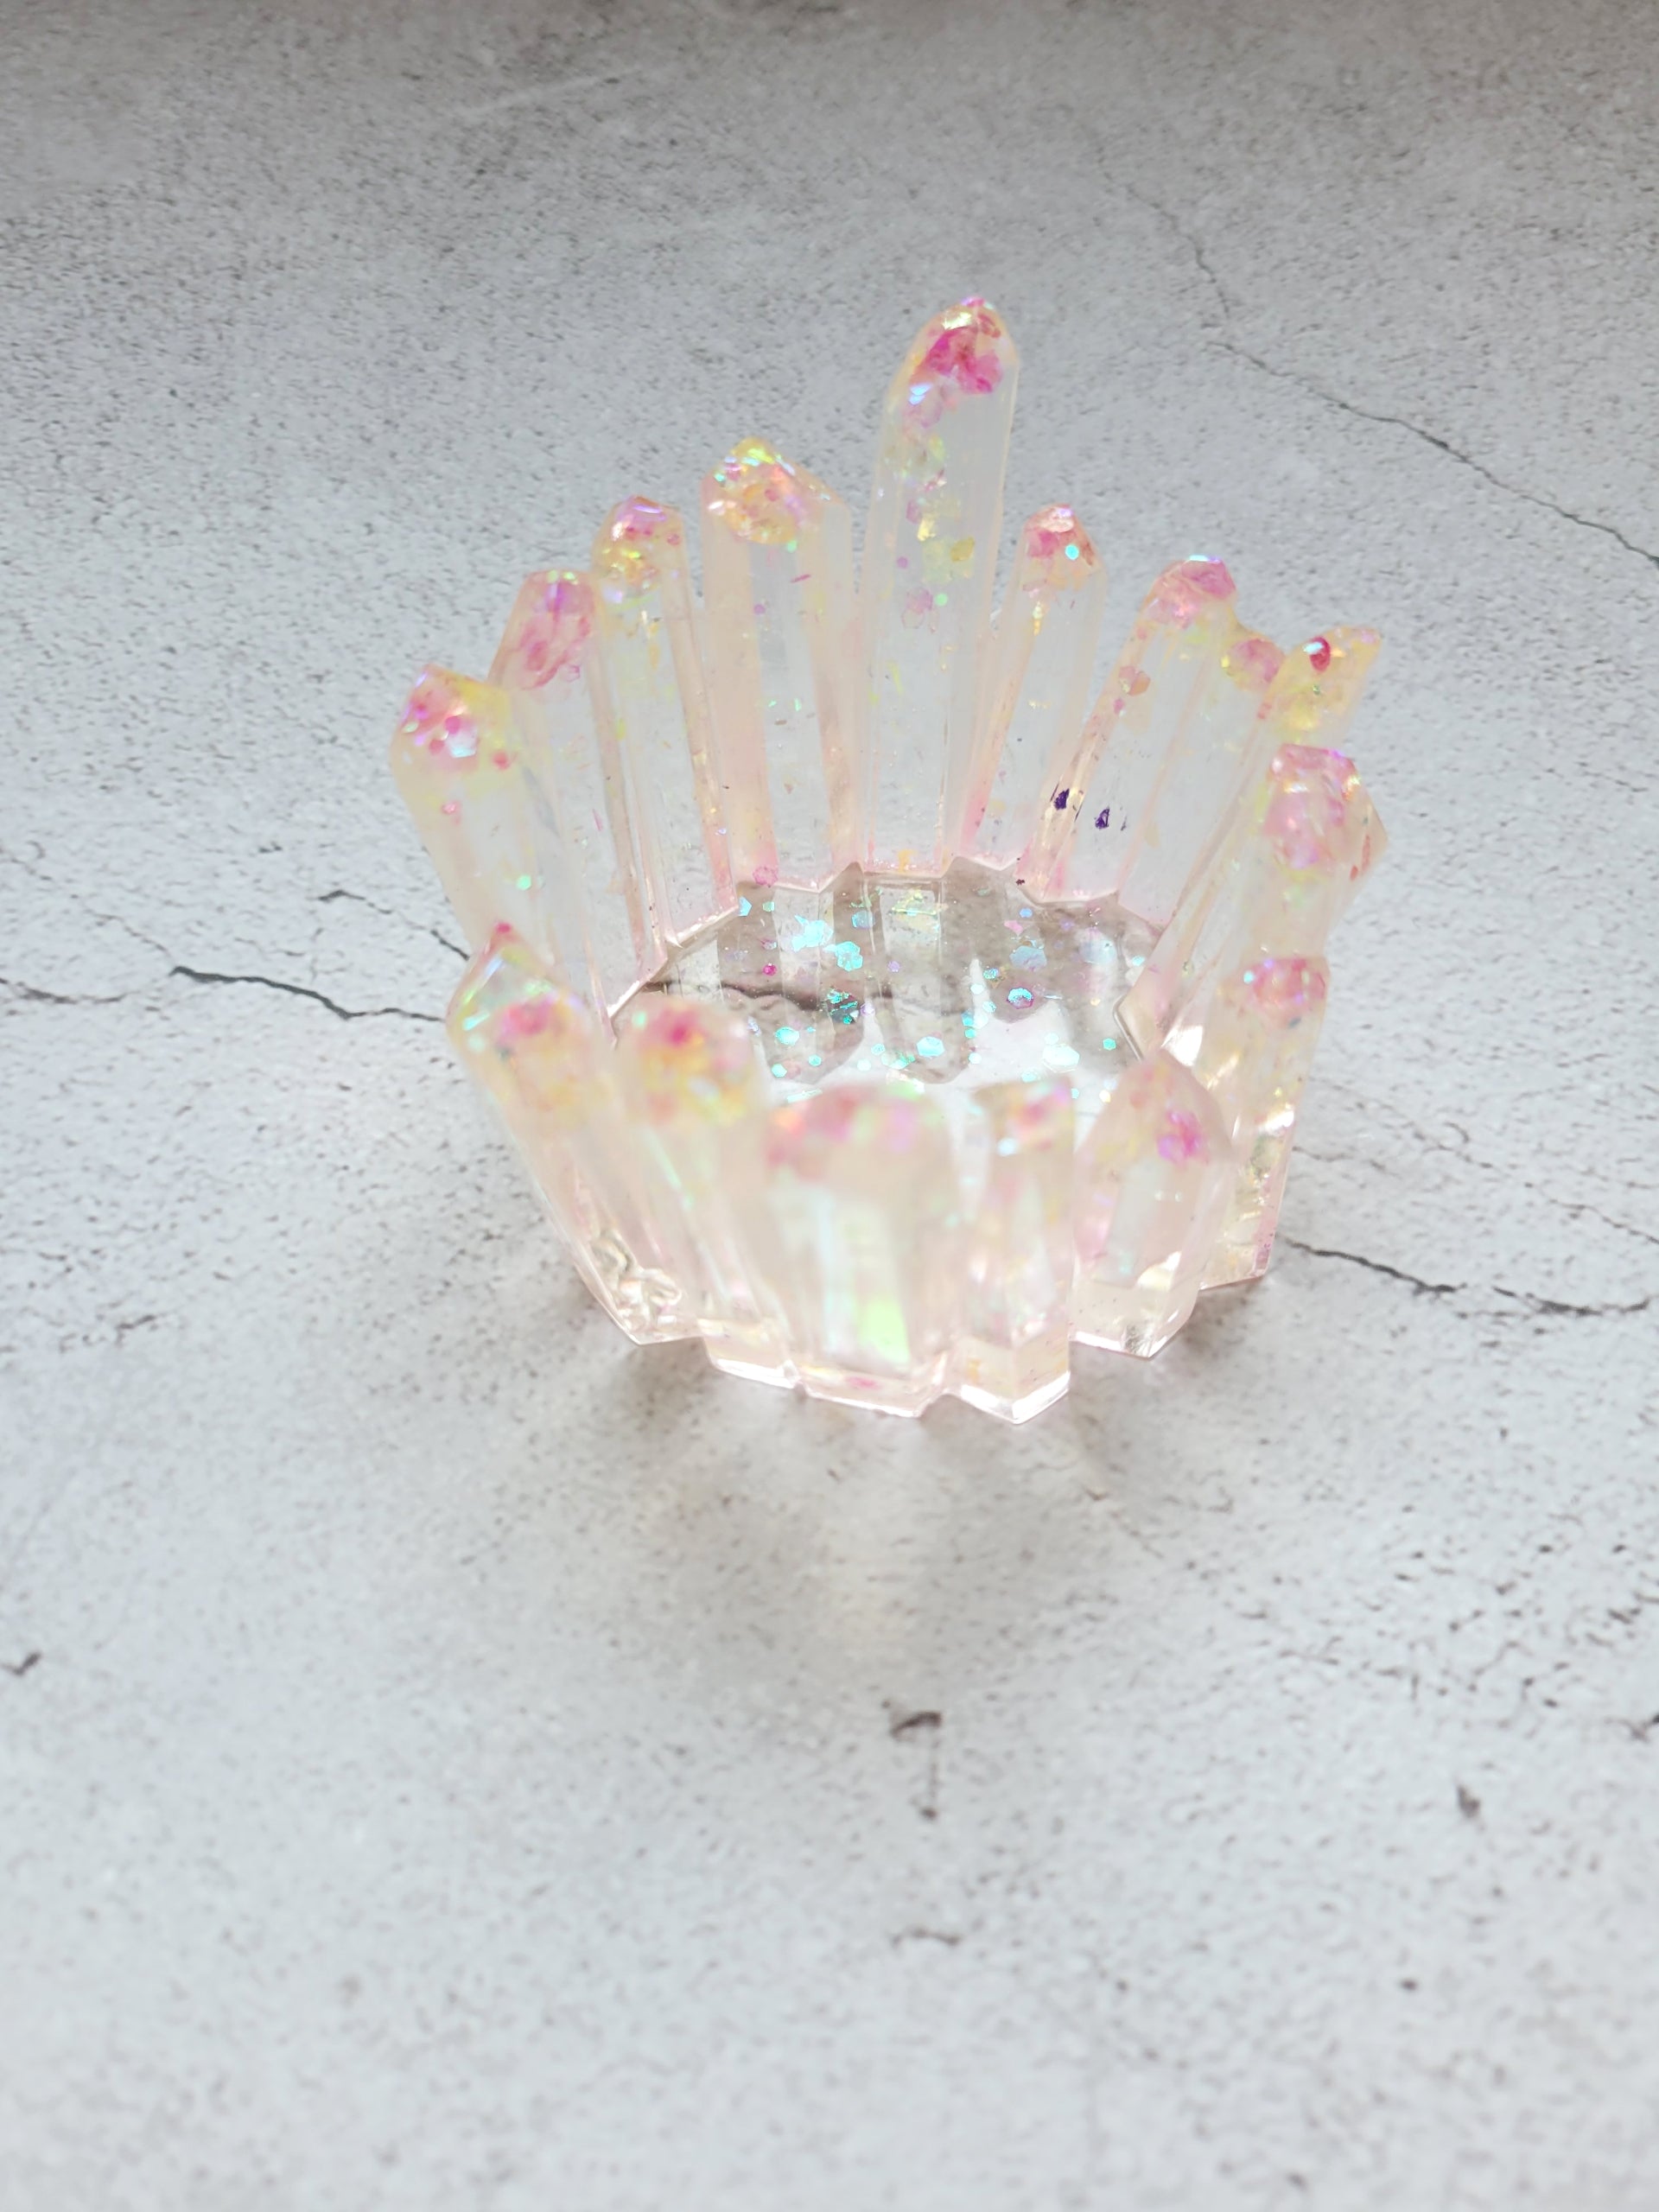 A side birds eye view of a tealight candle holder in the style of a cluster of crystals forming a circle. It's translucent clear with pink and yellow glitter. The crystals are various heights.